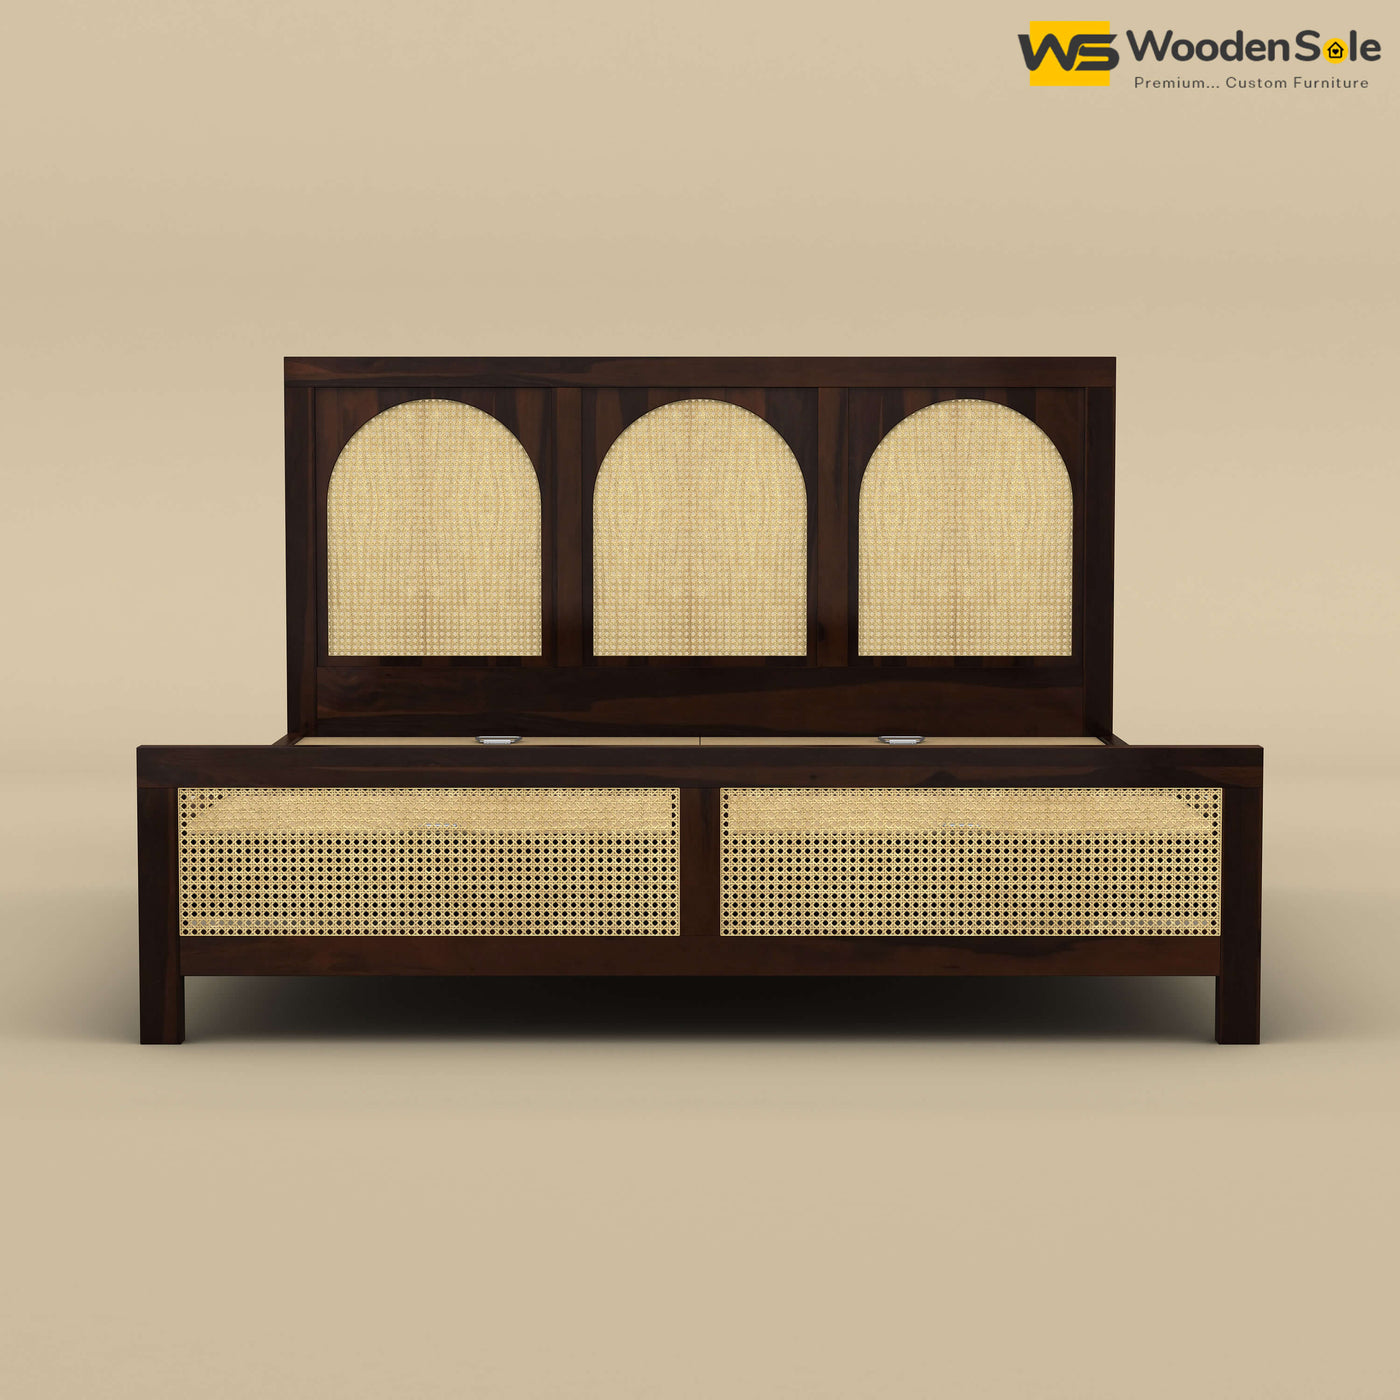 Wooden Rattan Cane Bed (King Size, Walnut Finish)